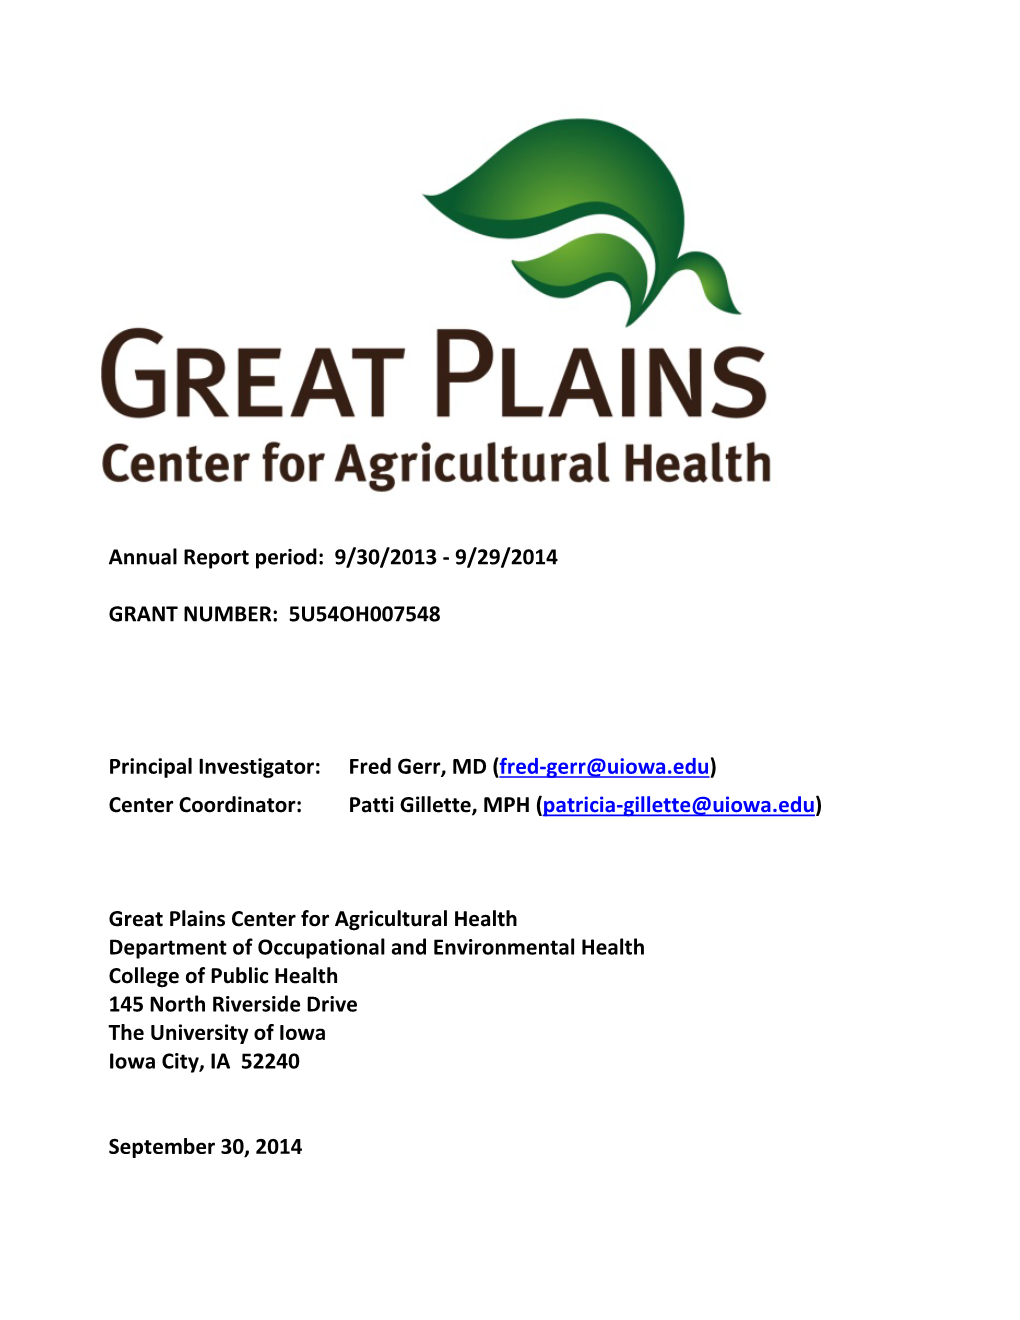 INS CENTER for AGRICULTURAL HEALTH 5U54OH007548, Gerr, F